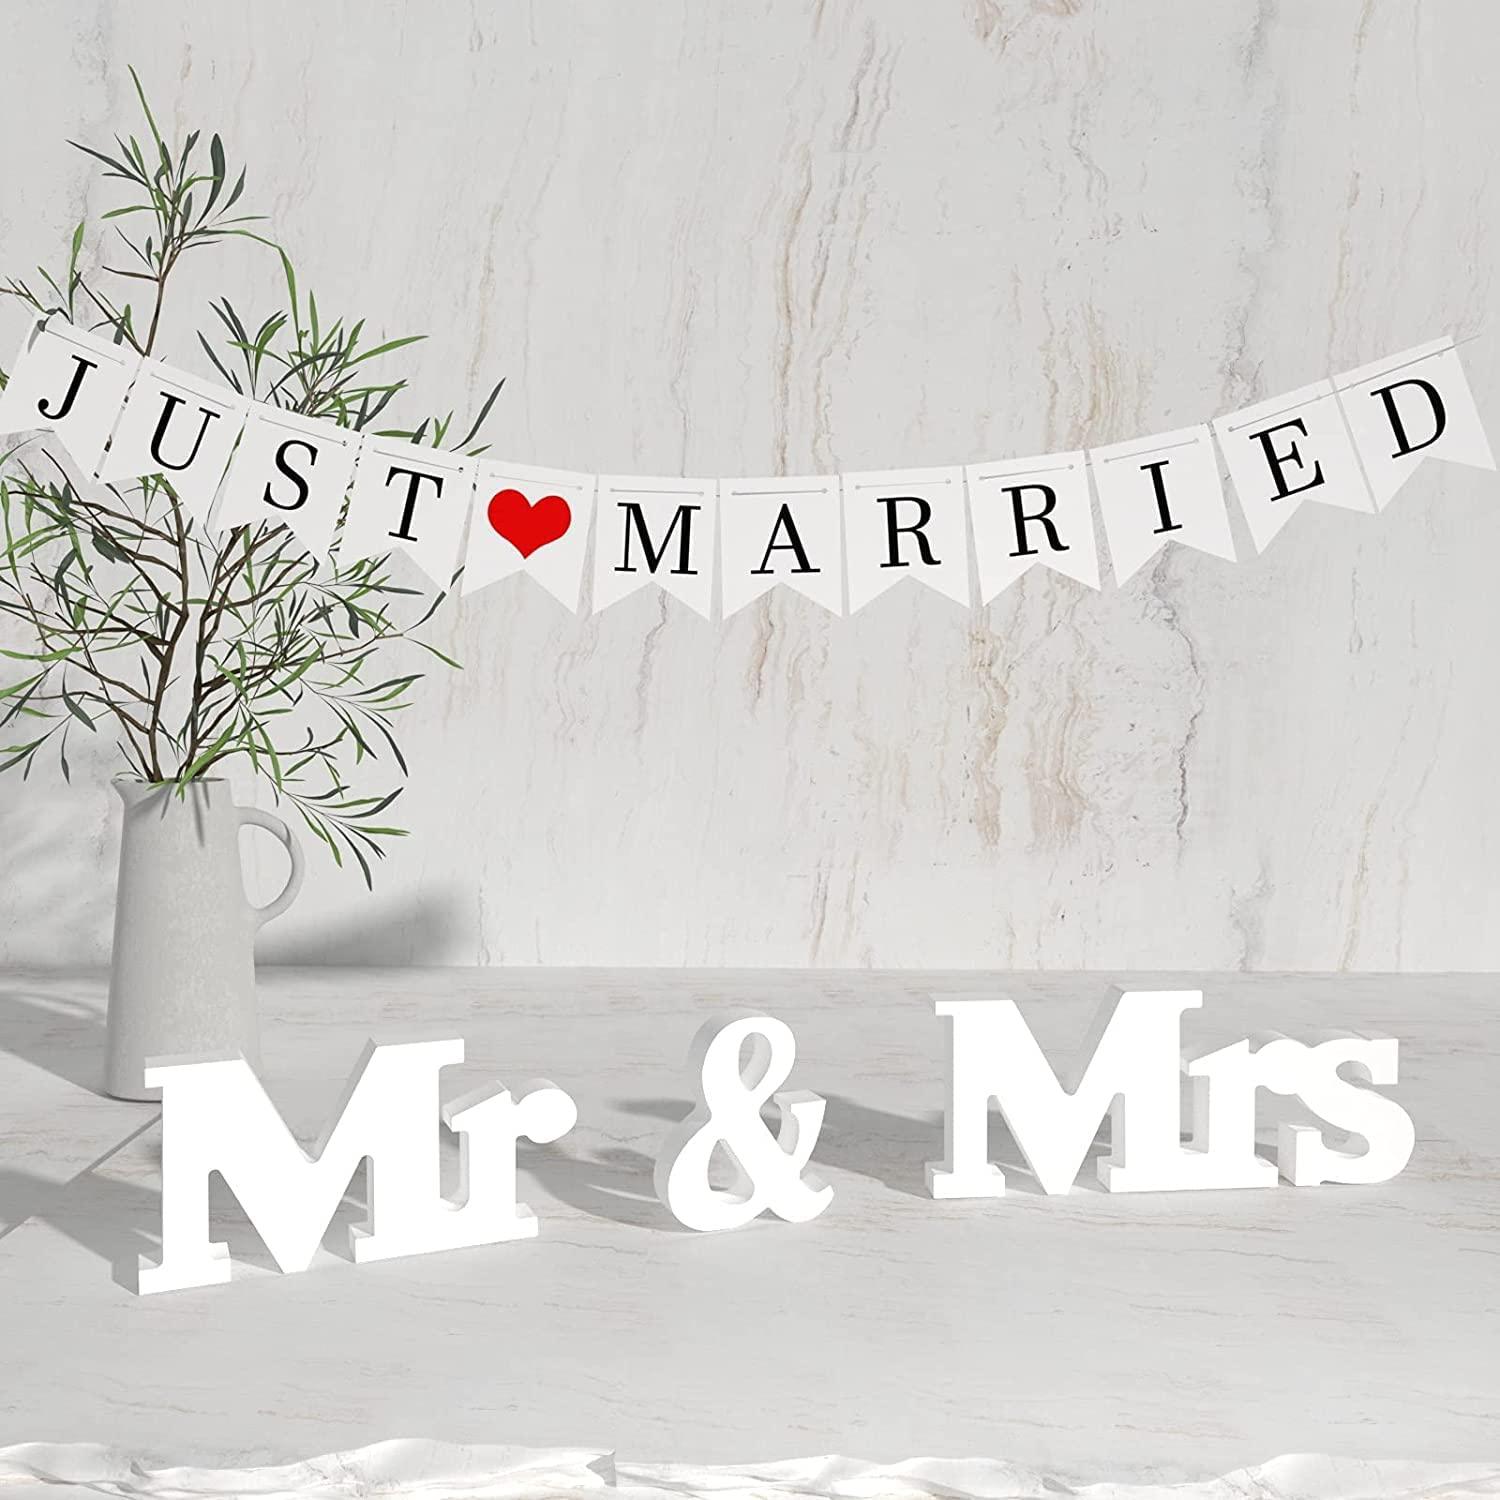 Just Married Car Decorations, JUST MARRIED Banner Wedding Bunting, Mr and  Mrs